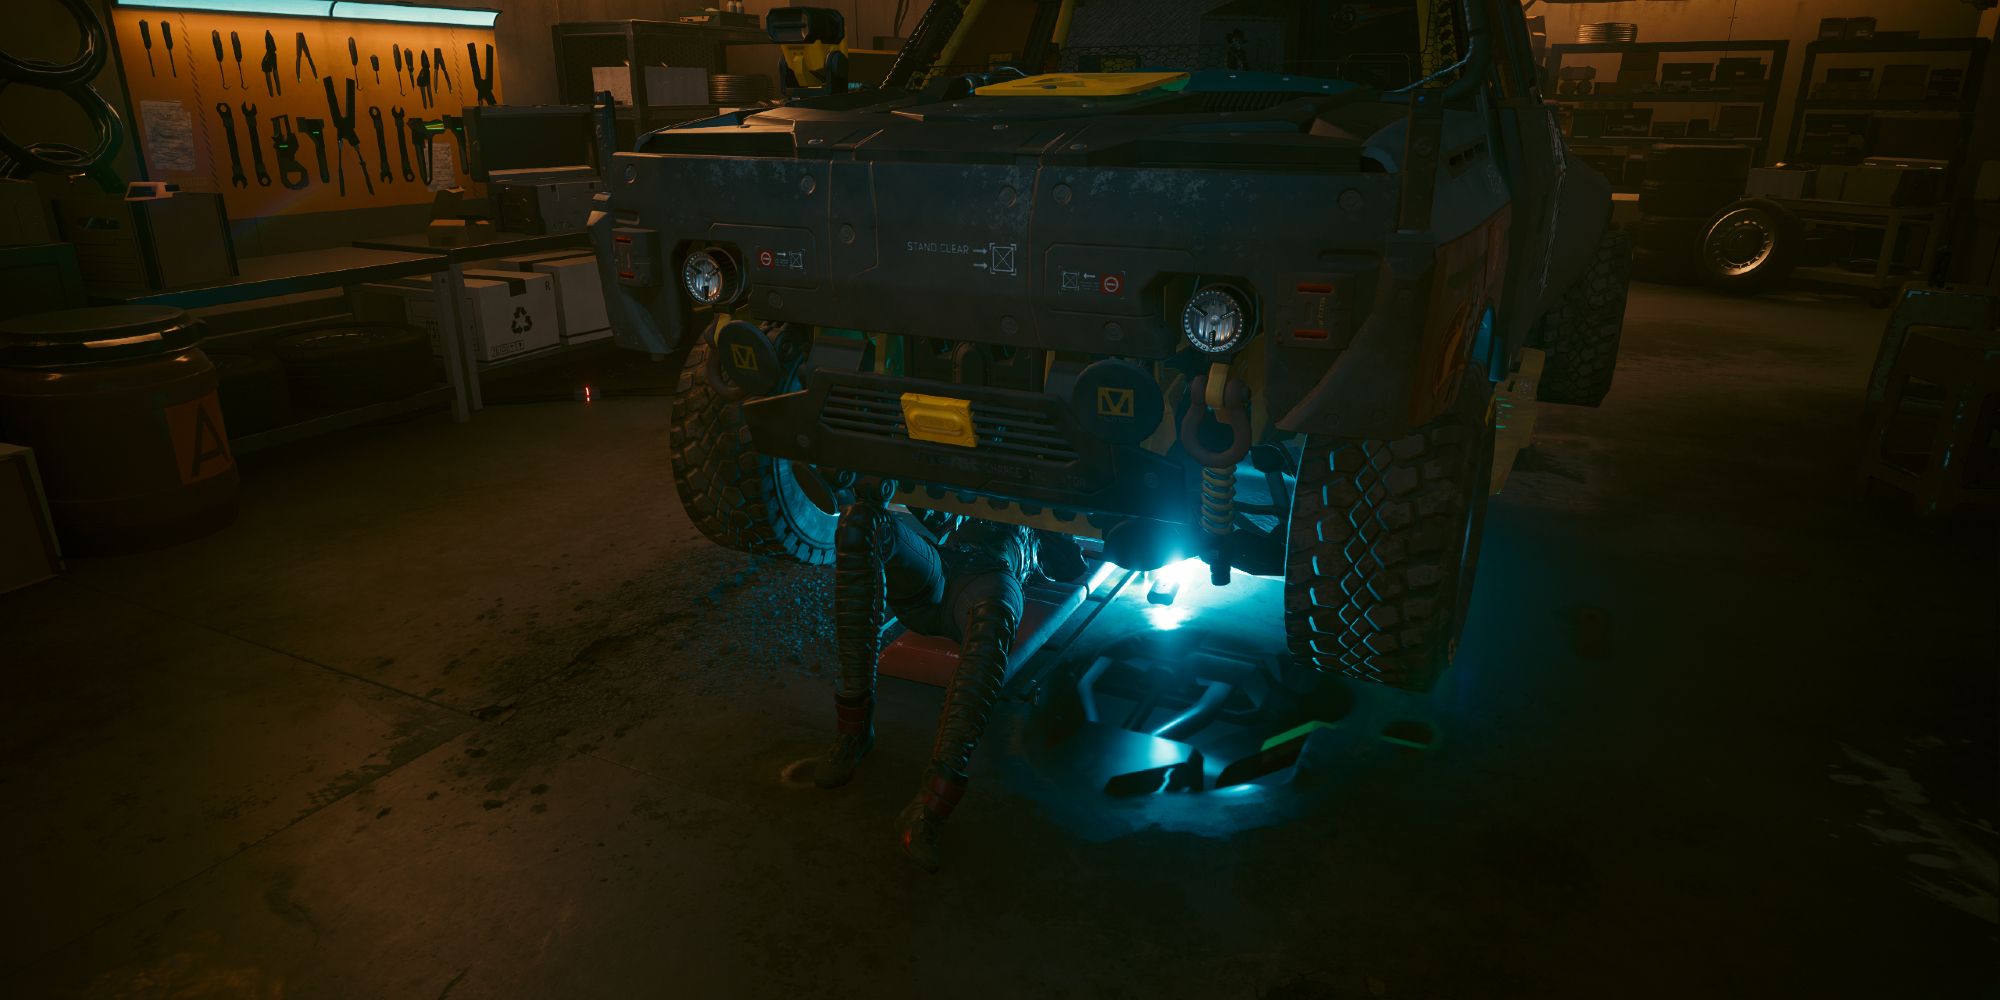 Panam doing a check on her vehicle in Cyberpunk 2077.